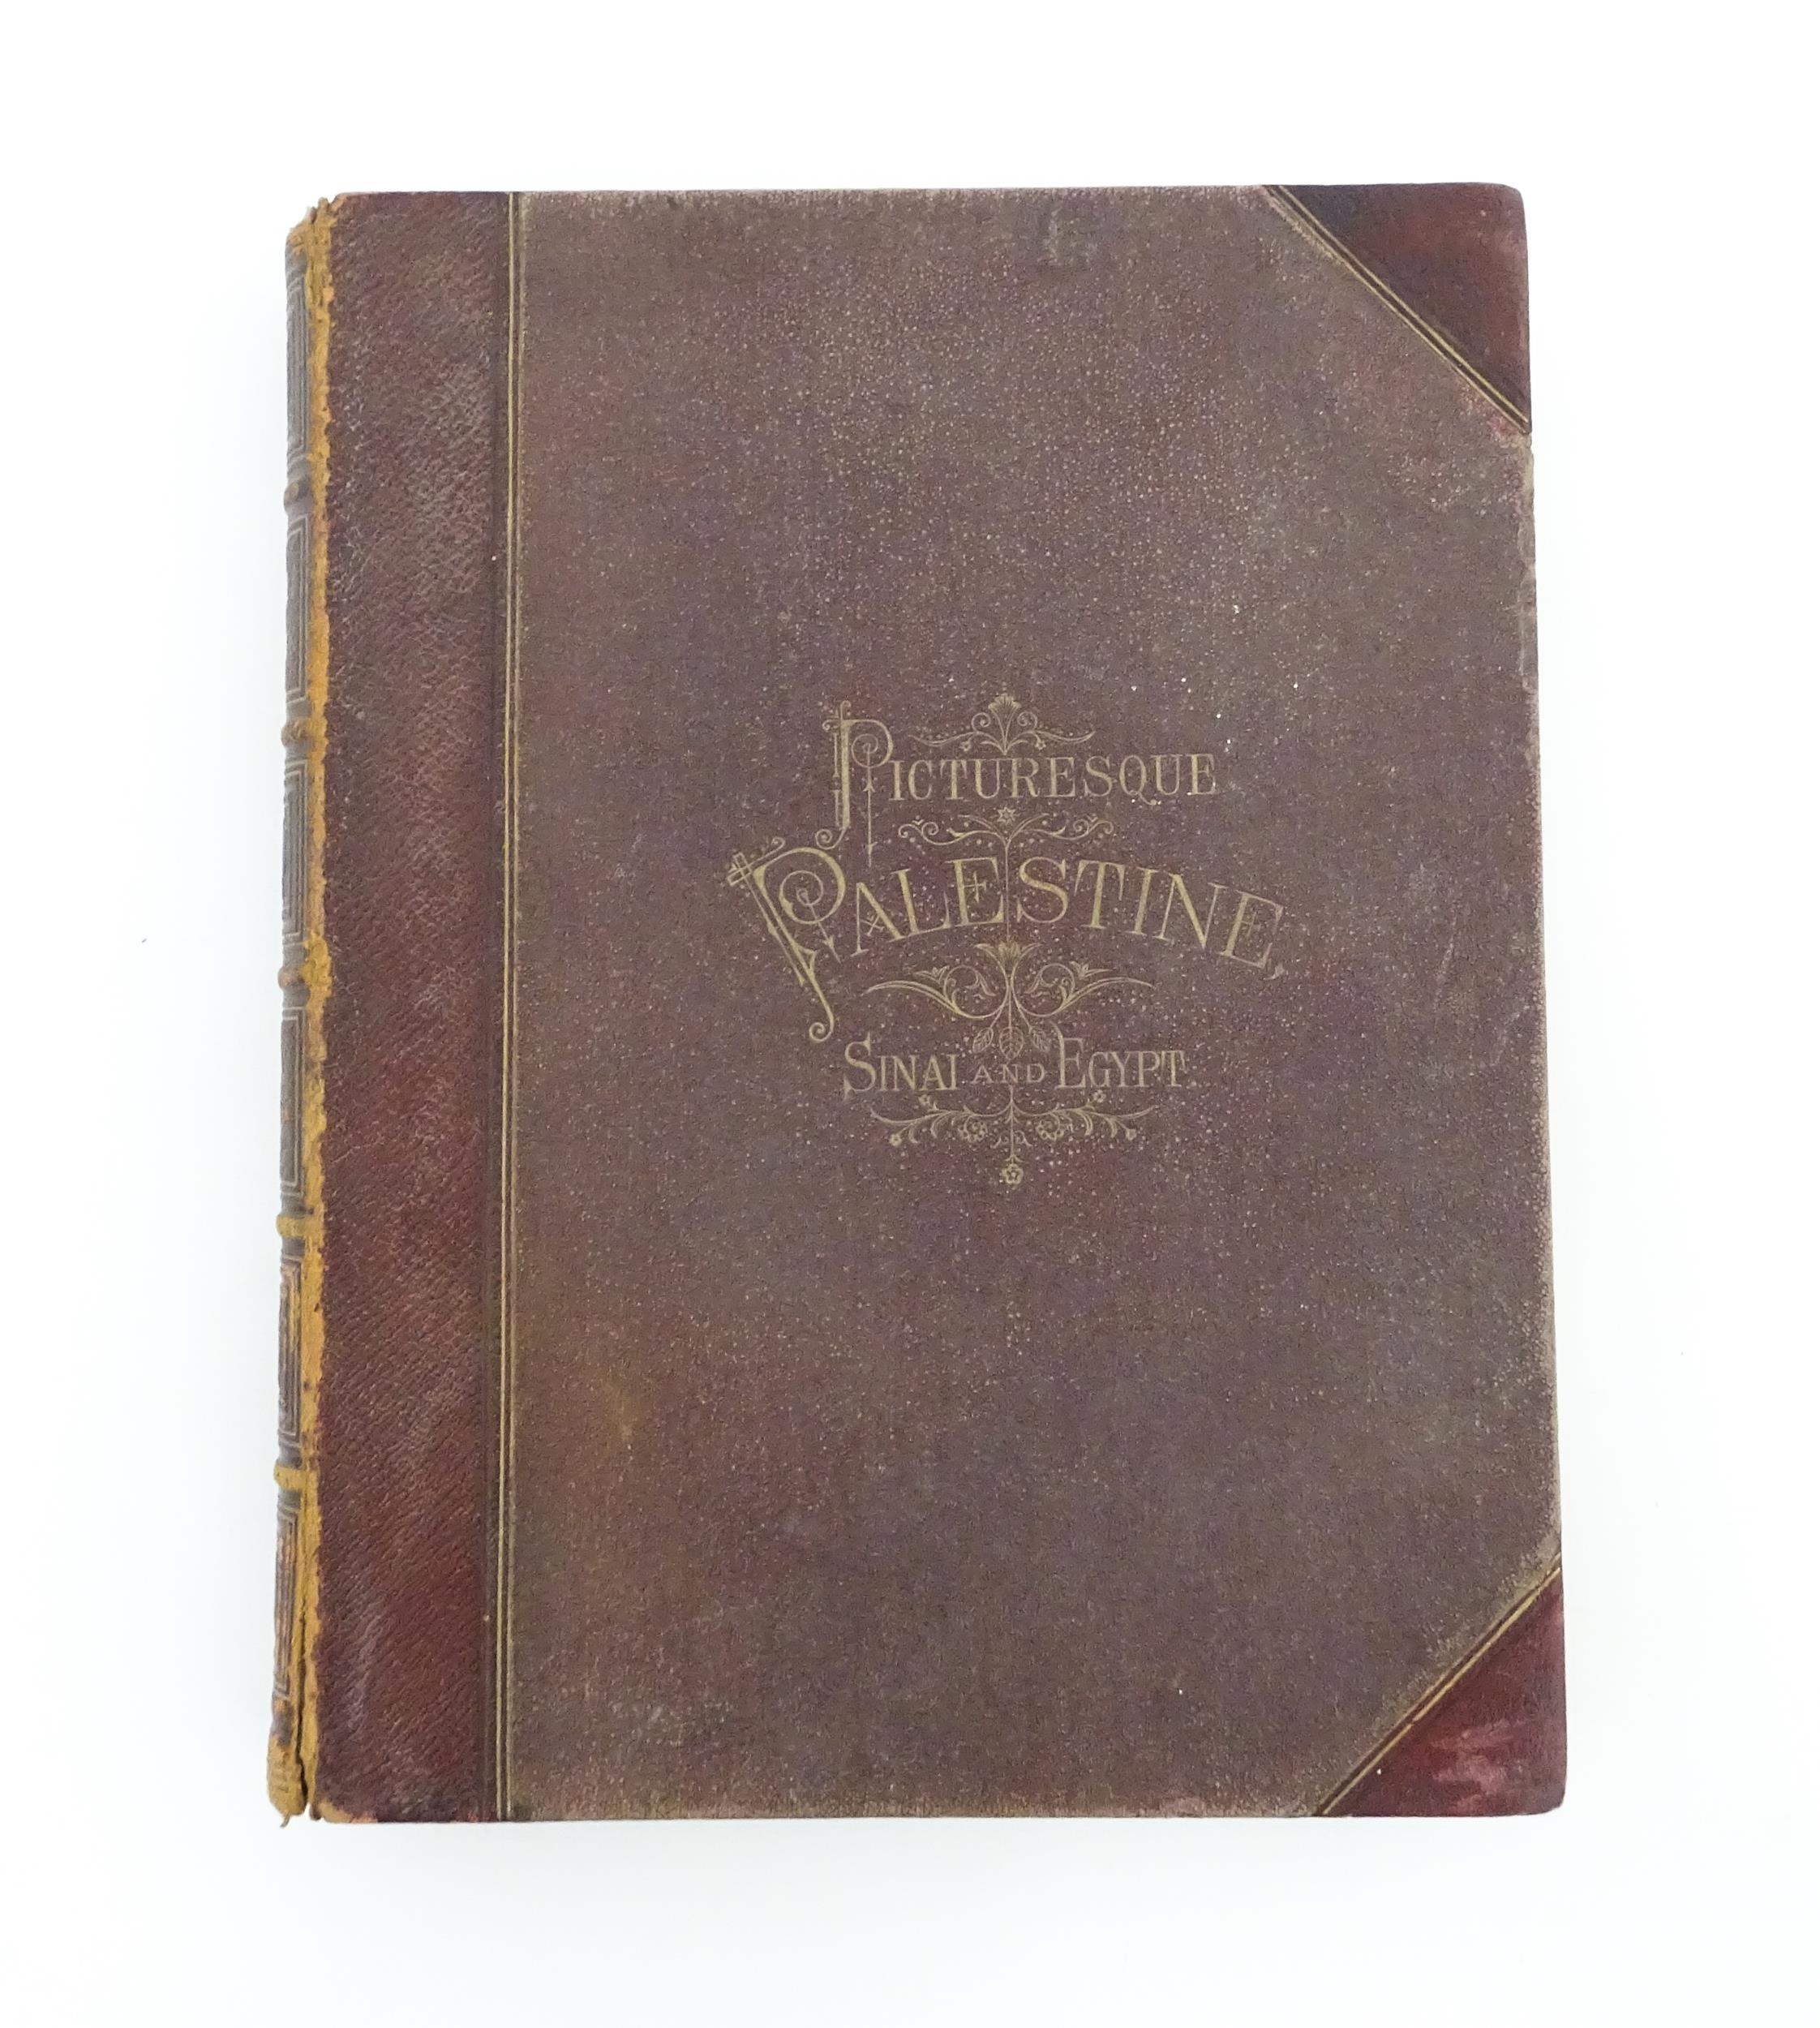 Book: Picturesque Palestine - Sinai and Egypt, volume 1, edited by Sir Charles Wilson. Published